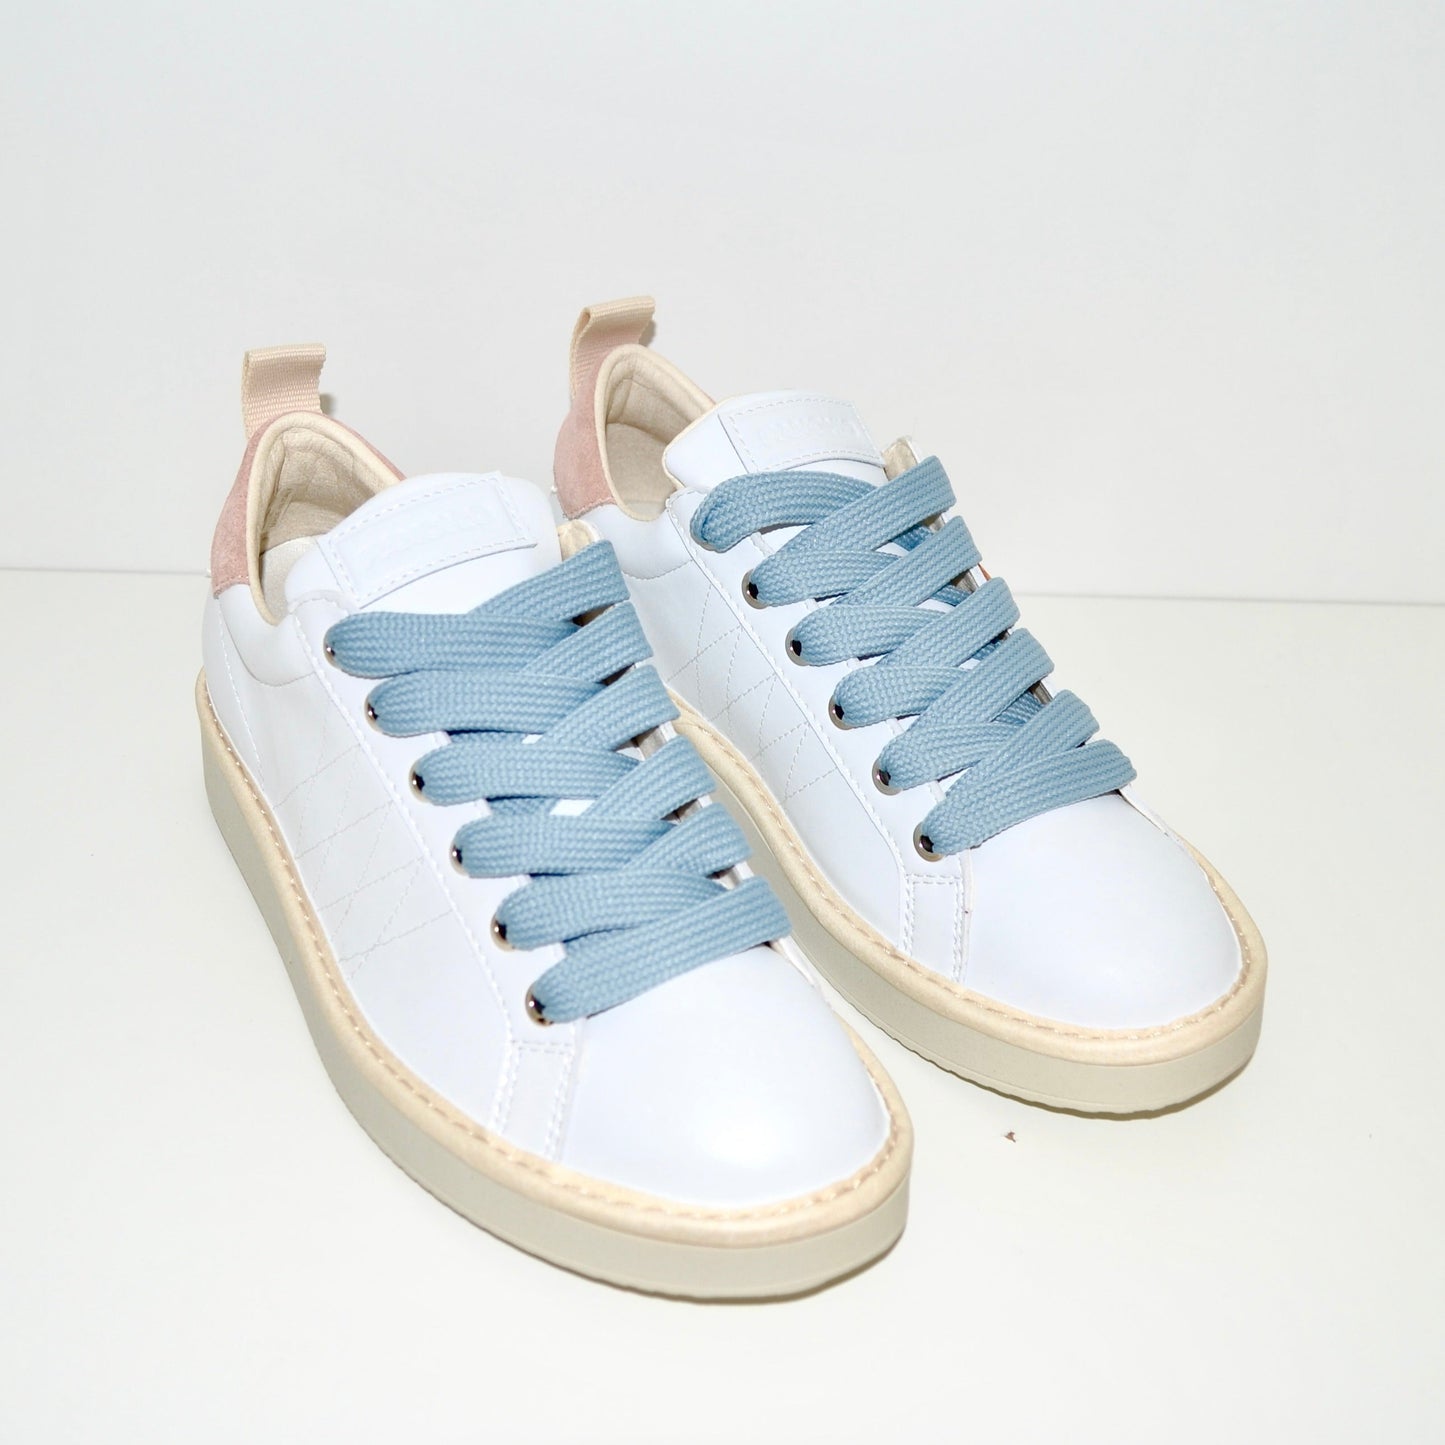 Sneakers Panchic donna pelle bianco